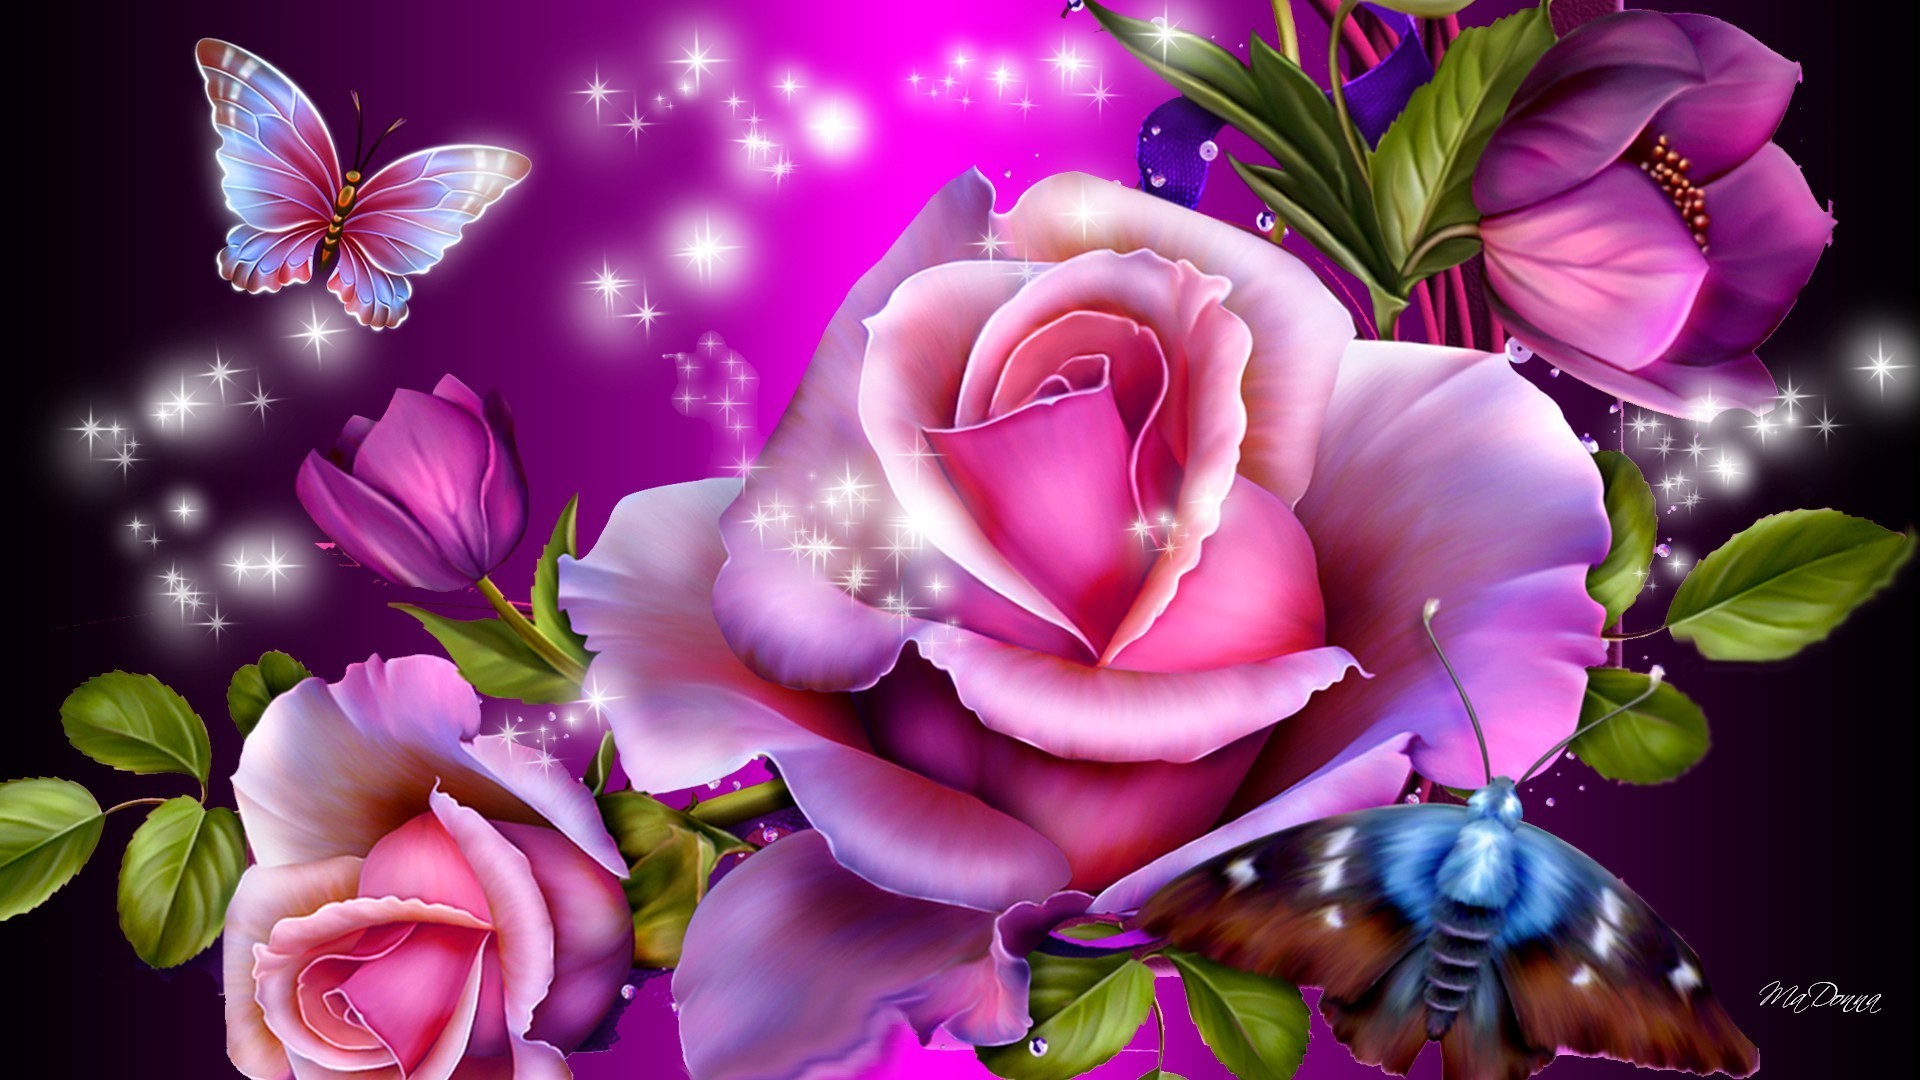 1920x1080  Drawn wallpapers Purple roses and butterflies